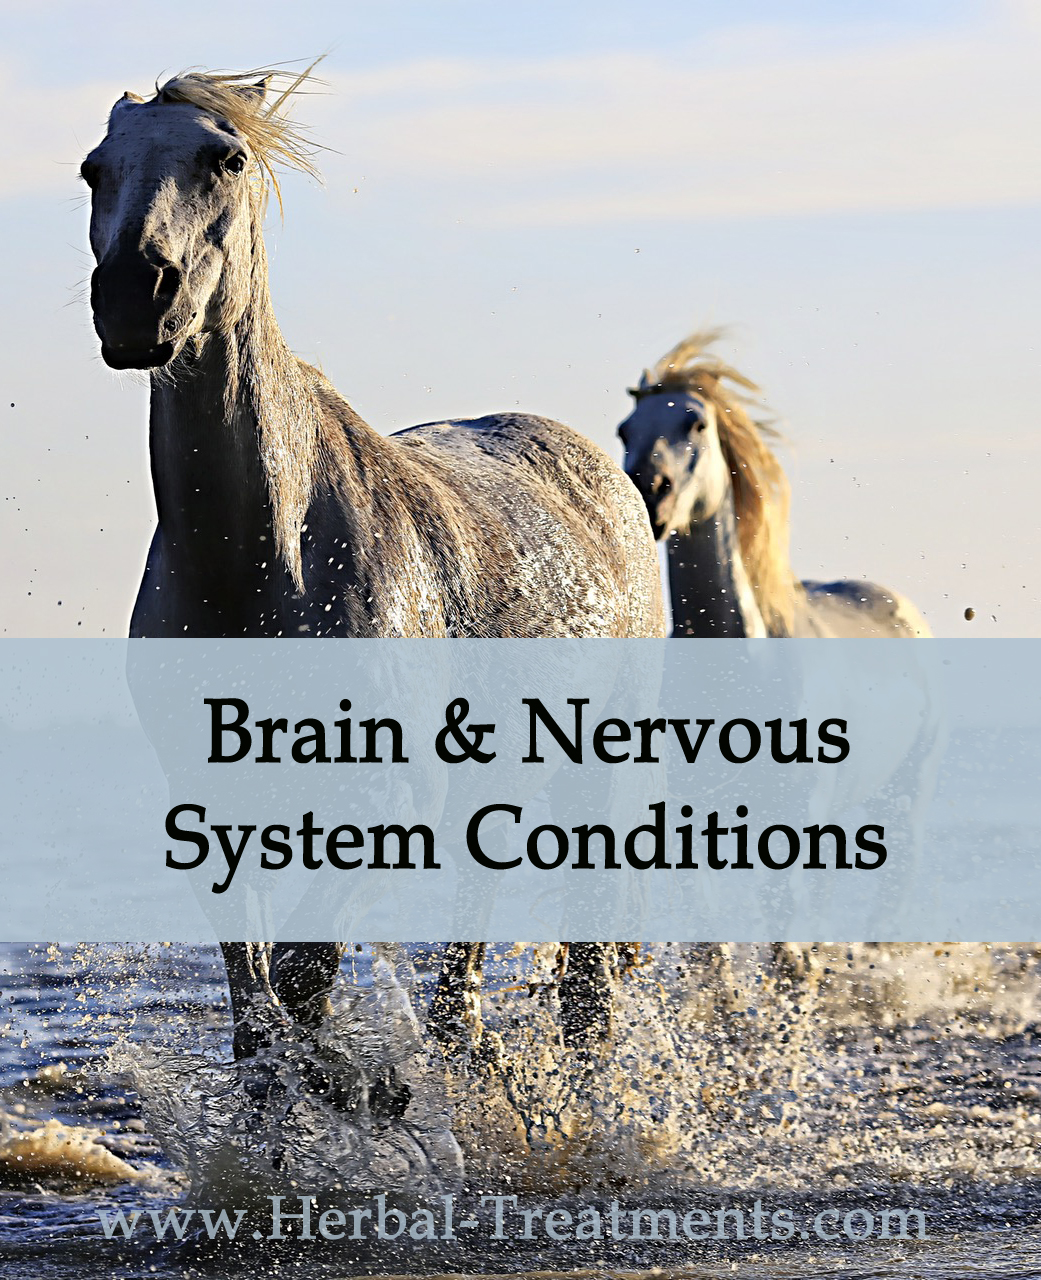 Herbal Treatments for Equine Brain and Nervous Conditions